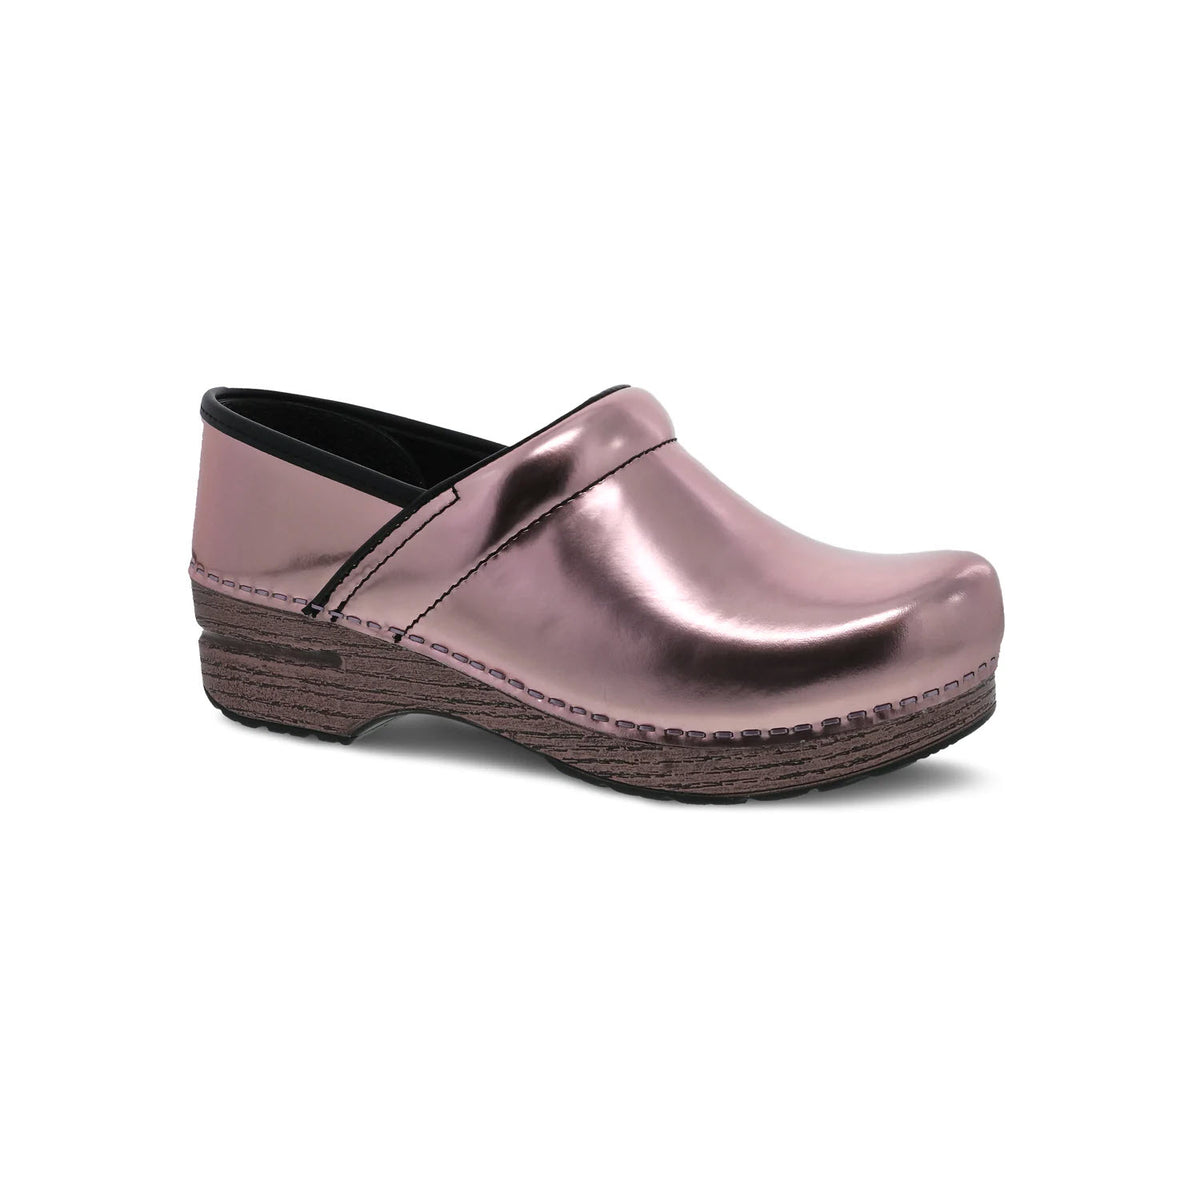 A Dansko metallic pink professional clog with a black interior and a wooden sole, isolated on a white background.